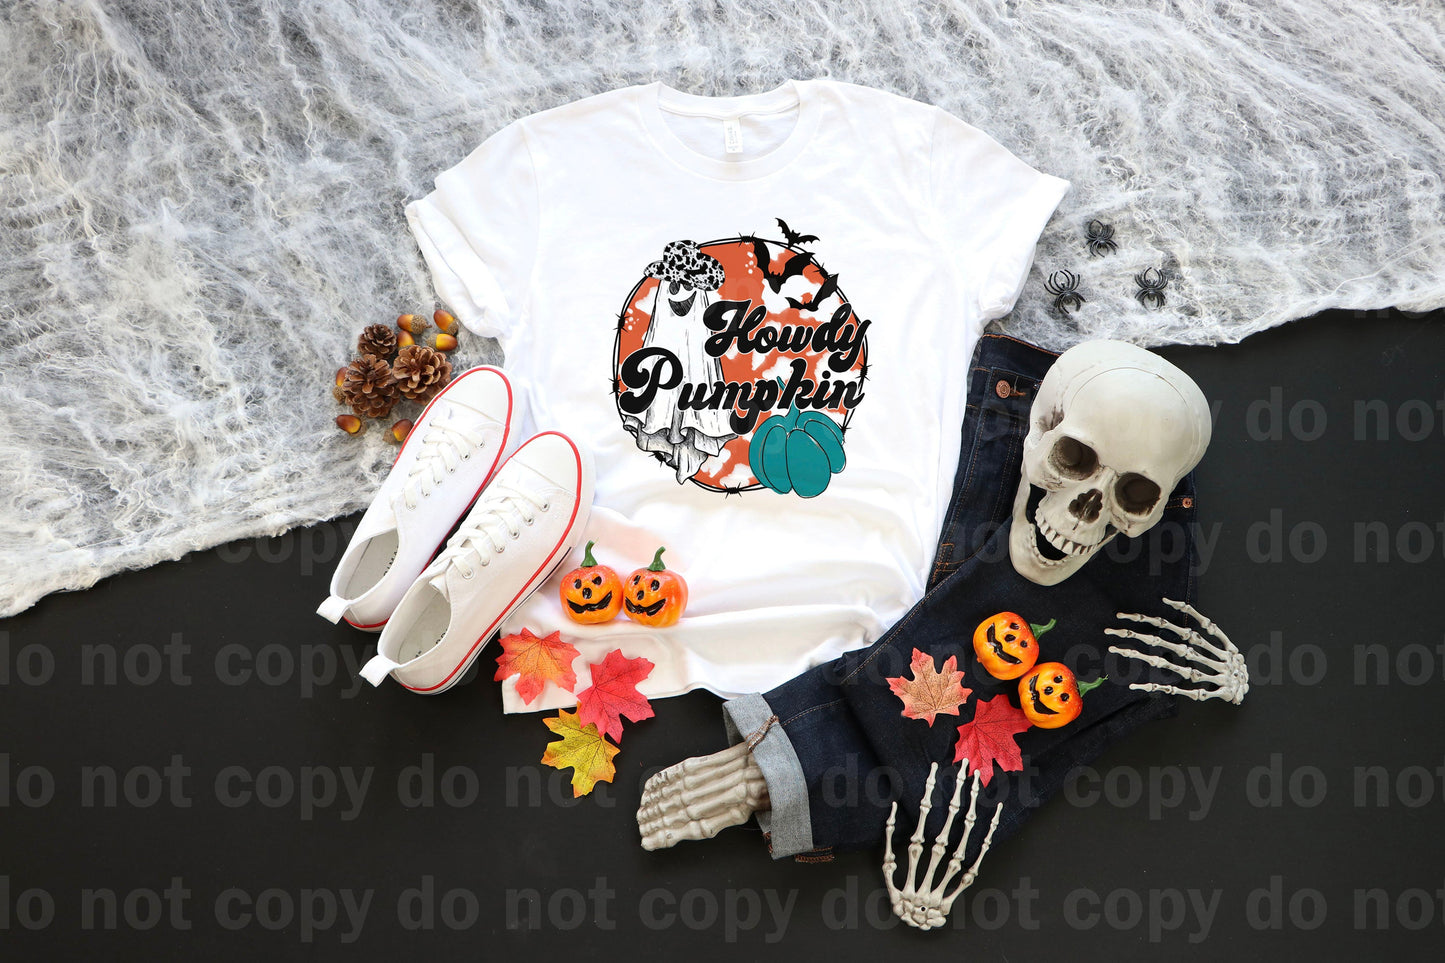 Howdy Pumpkin with Bats Dream Print or Sublimation Print